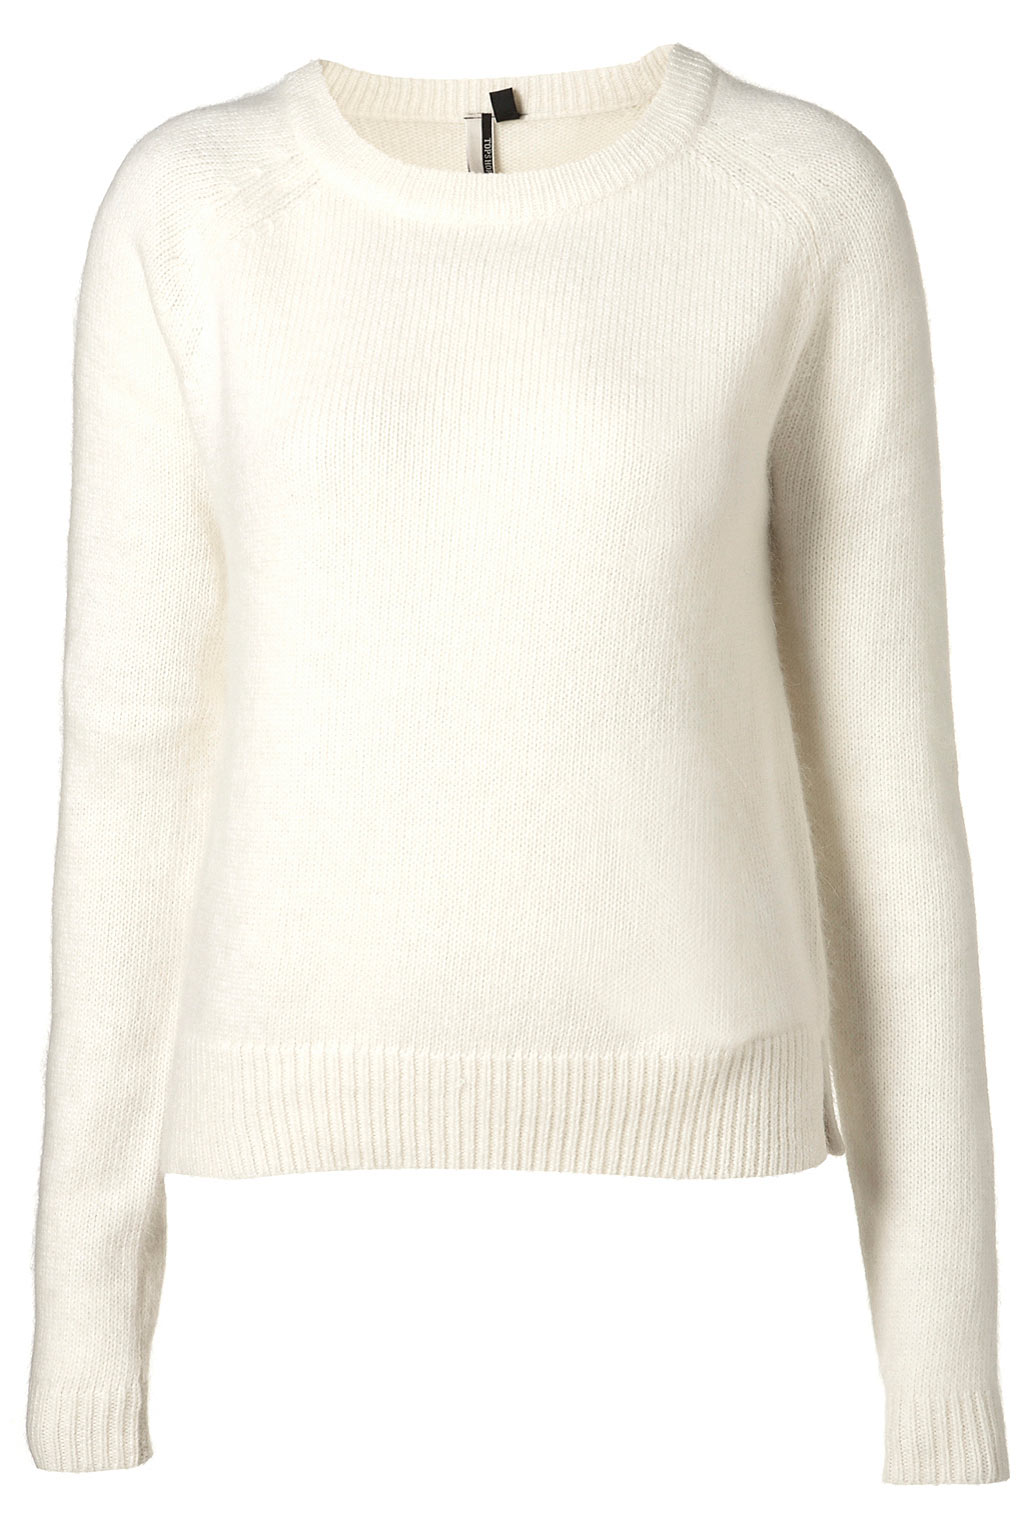 Topshop Knitted Fluffy Jumper in White (cream) | Lyst